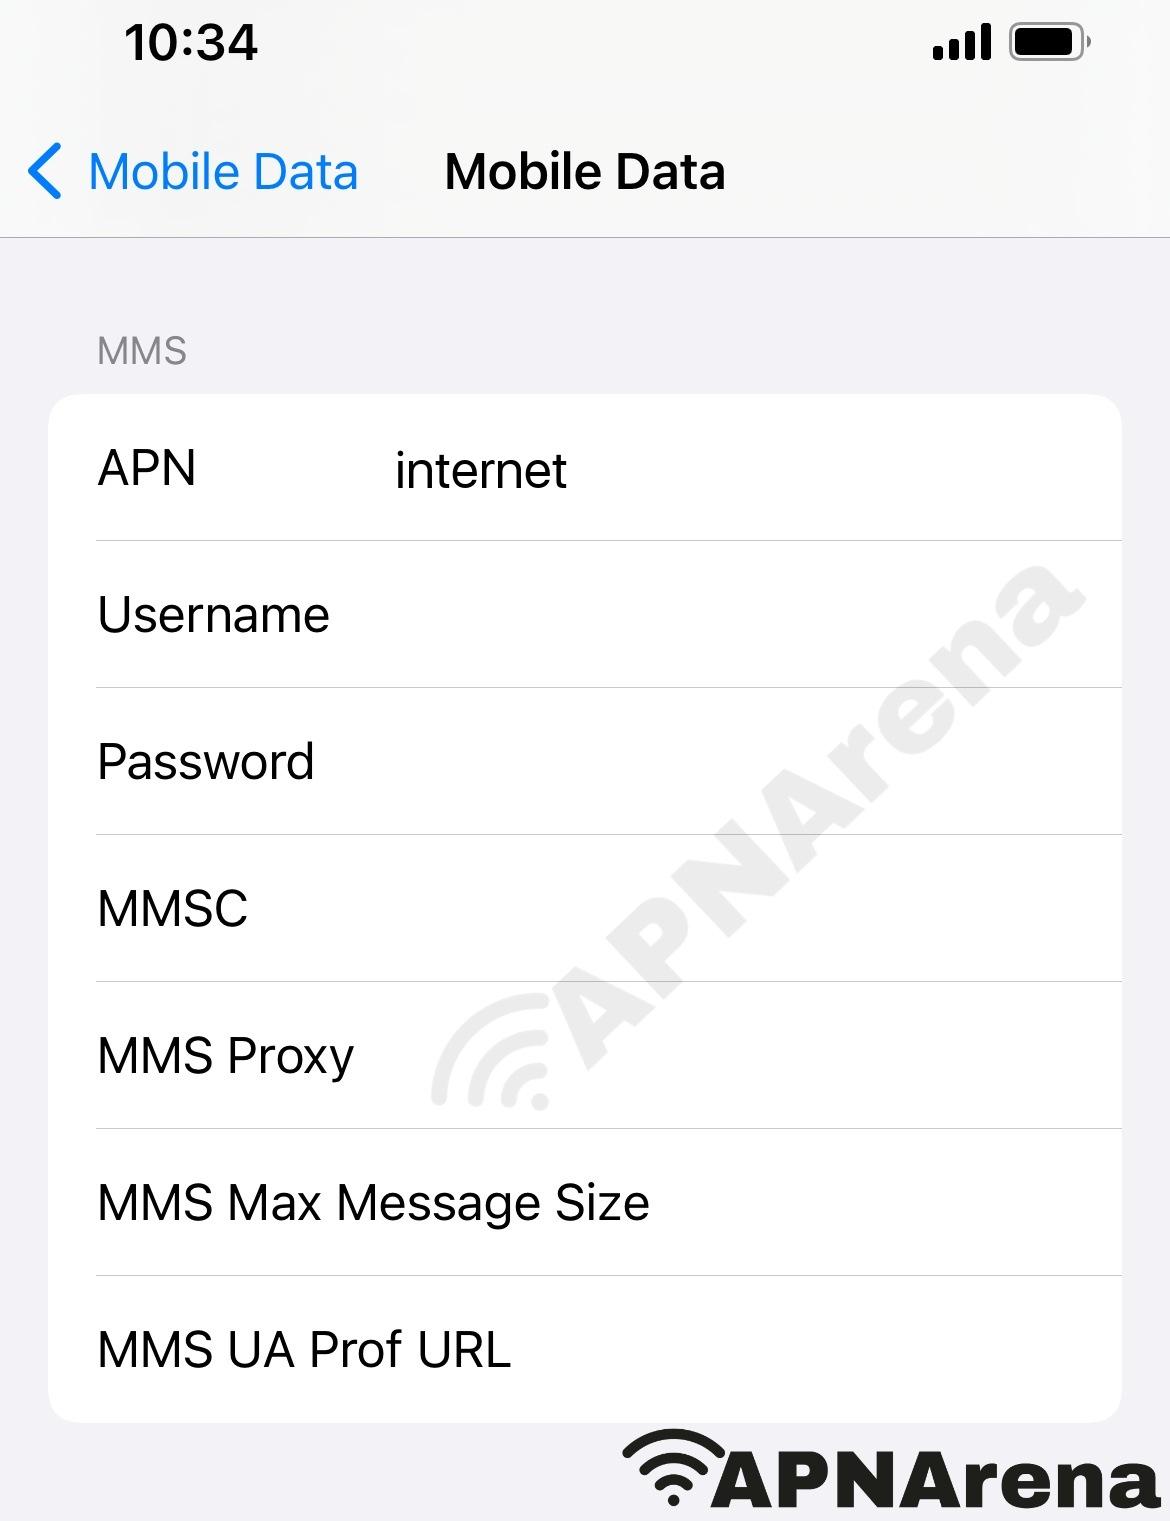 mts Serbia MMS Settings for iPhone